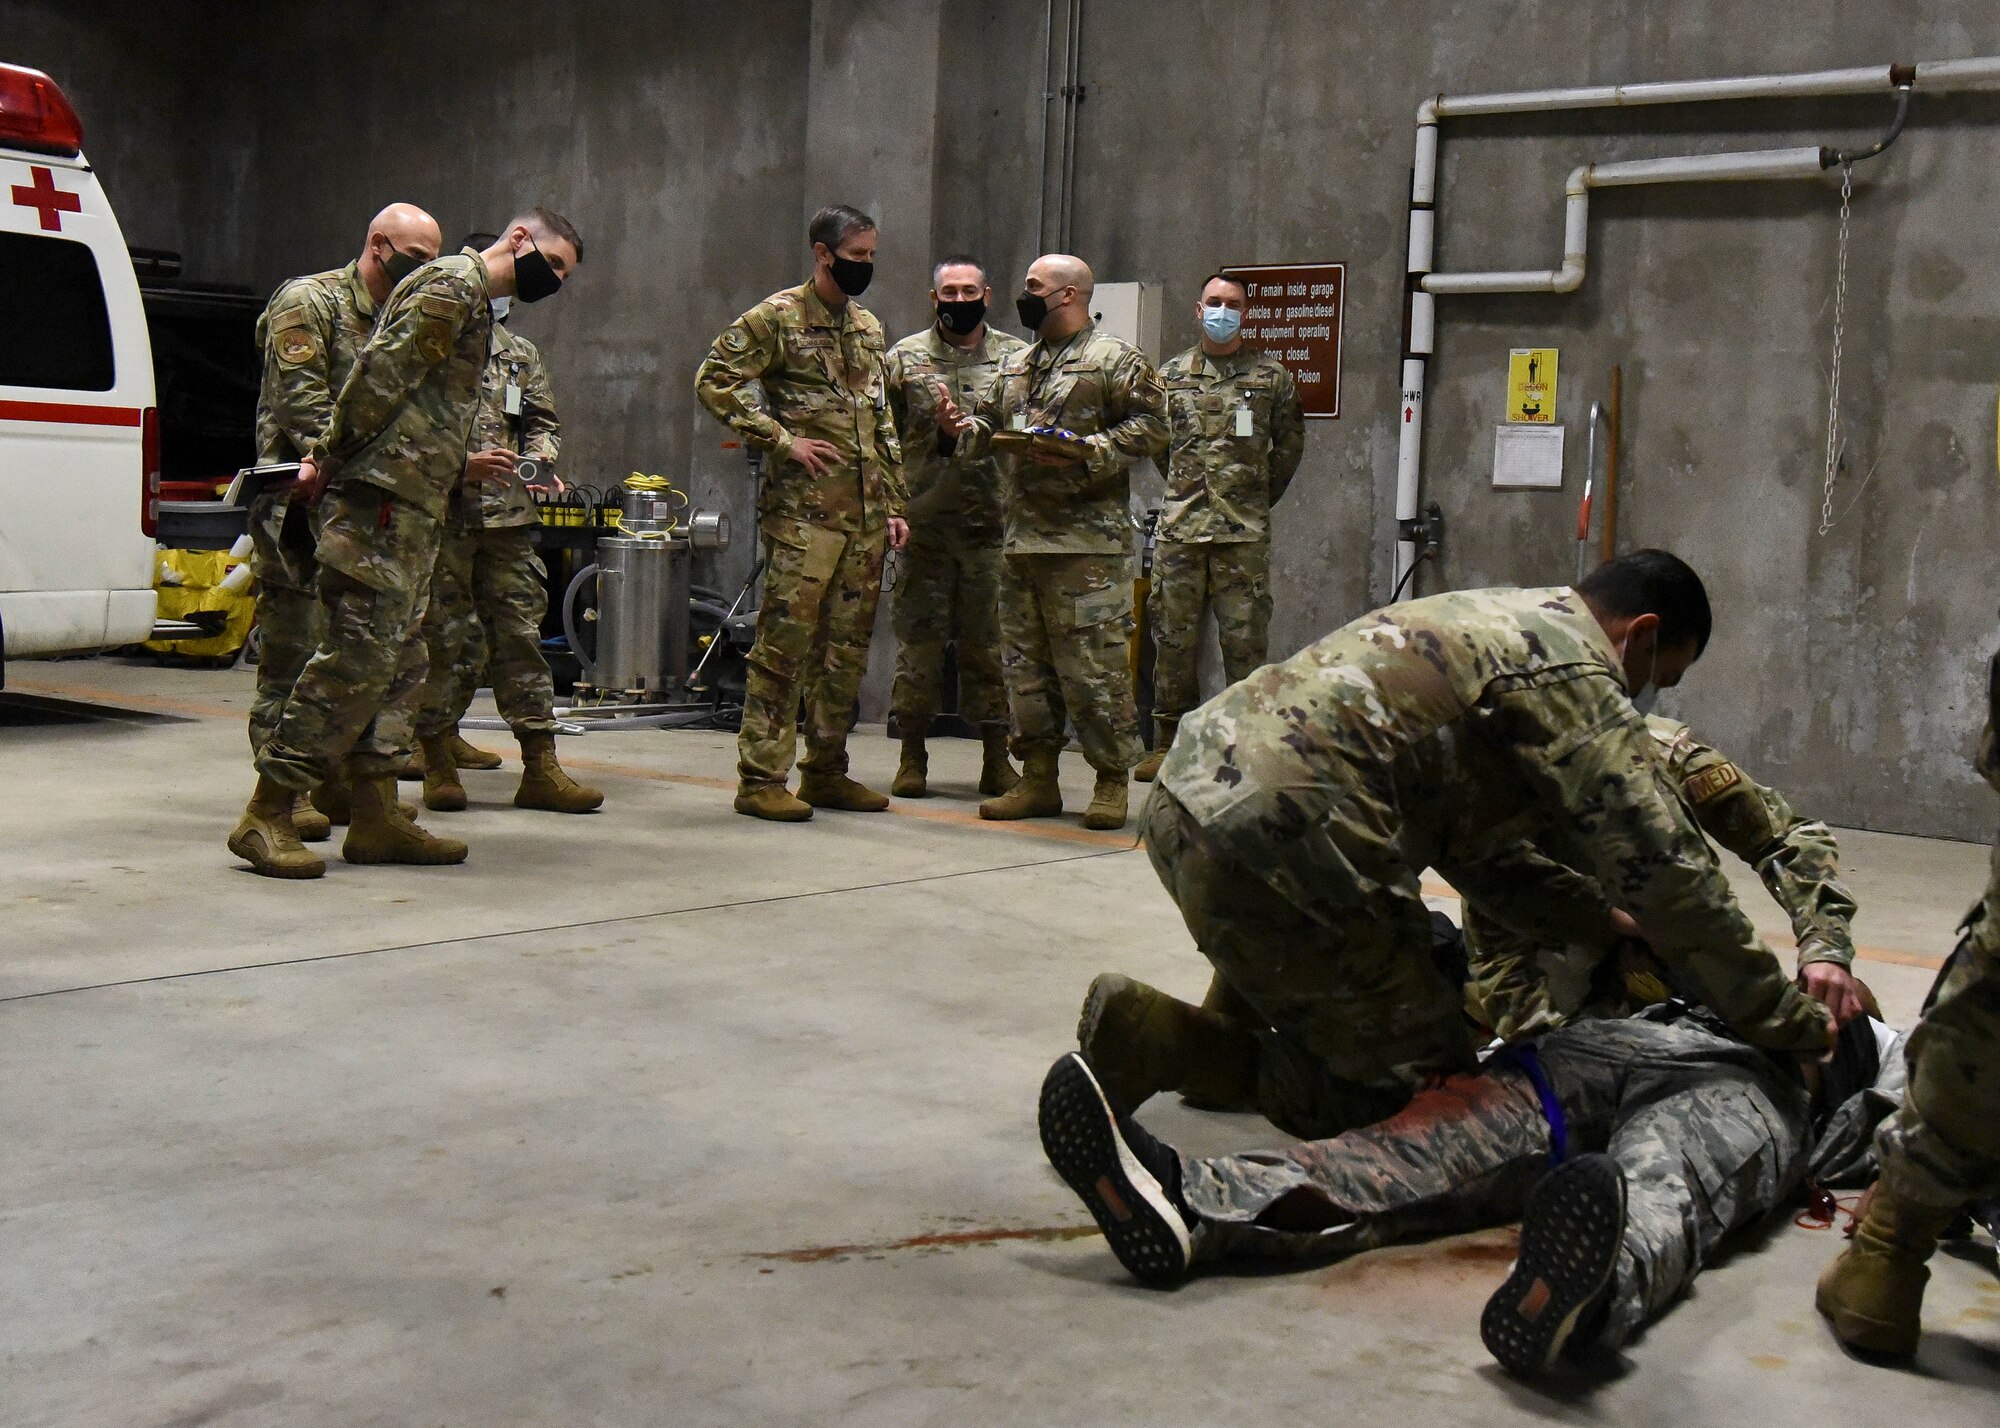 Military members work on an acting victim in front of an audience of military members.